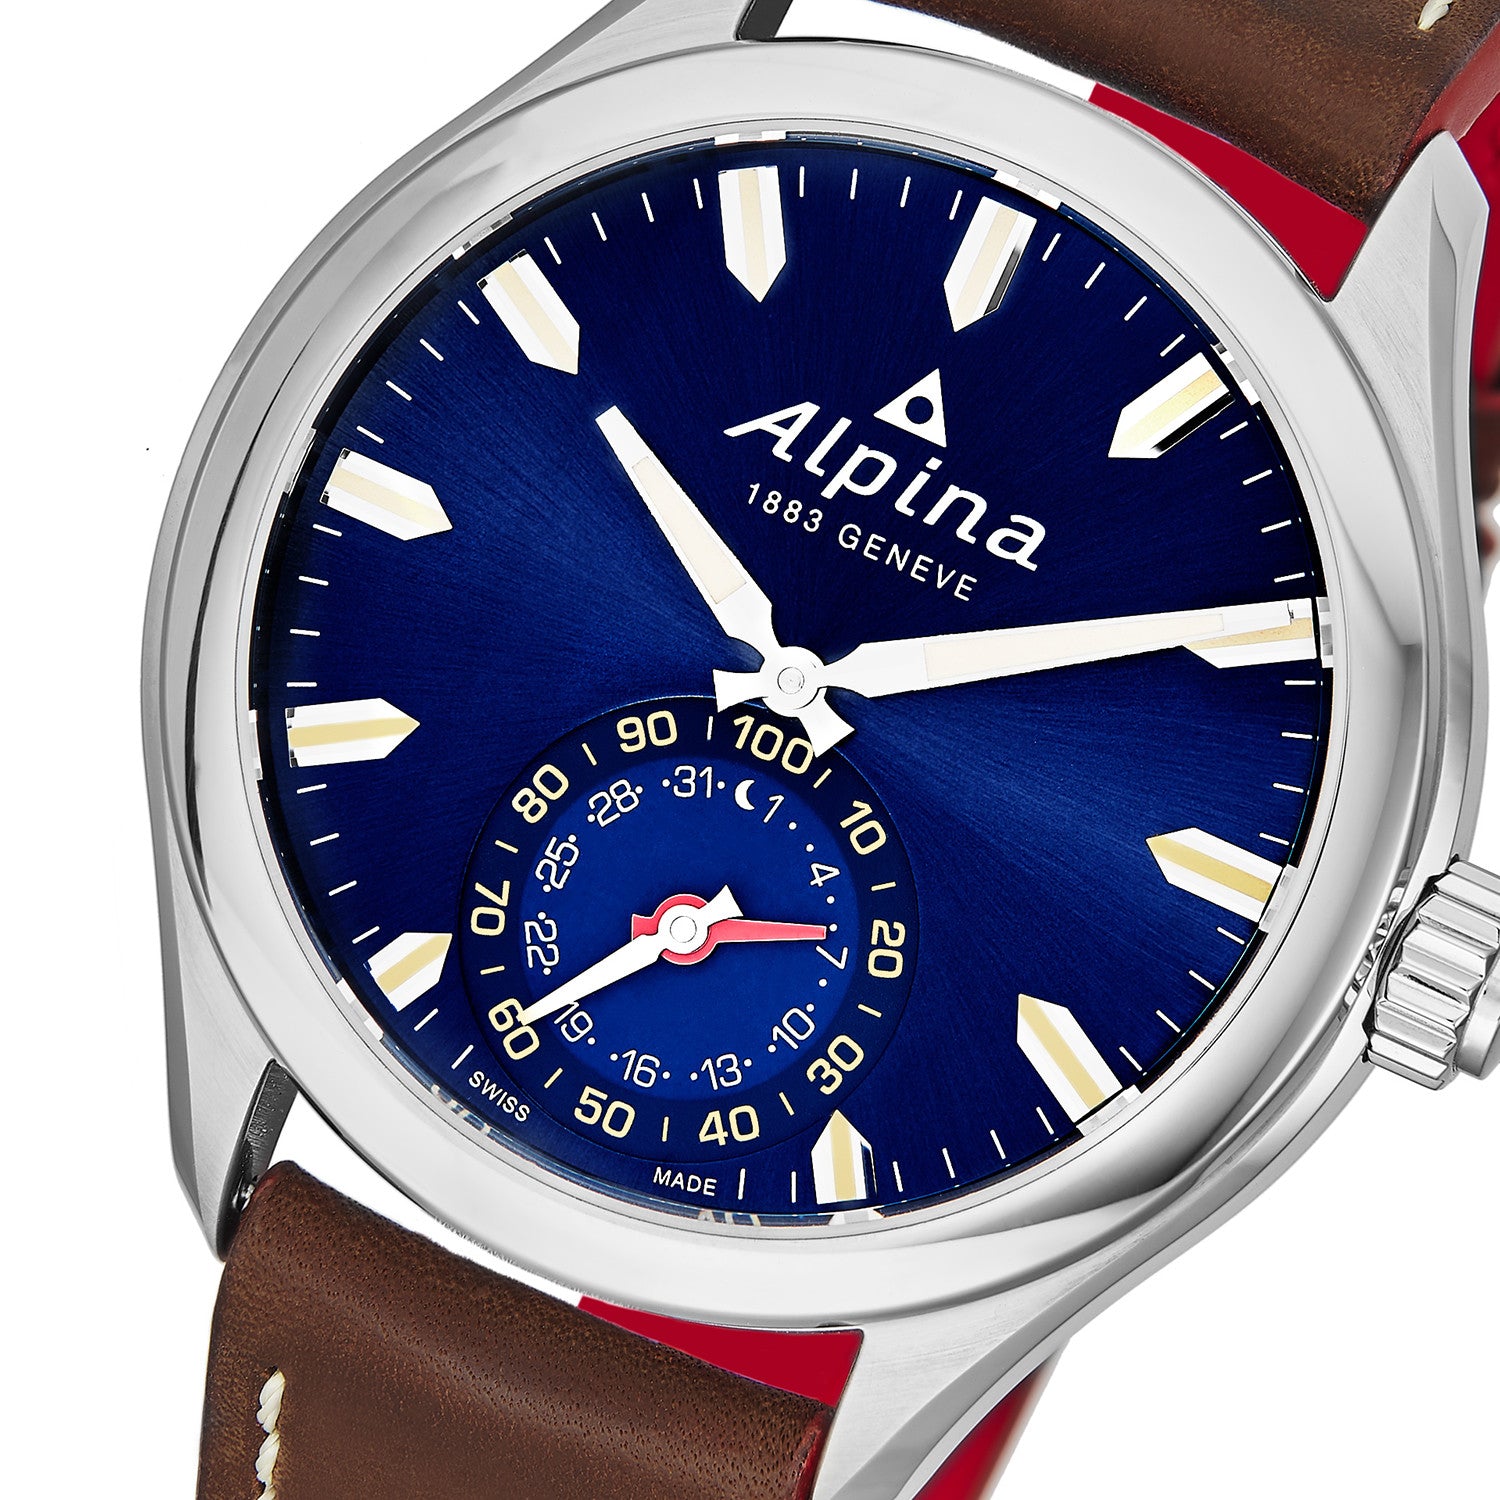 Horological Smartwatch (Blue) | Alpina | Luby 